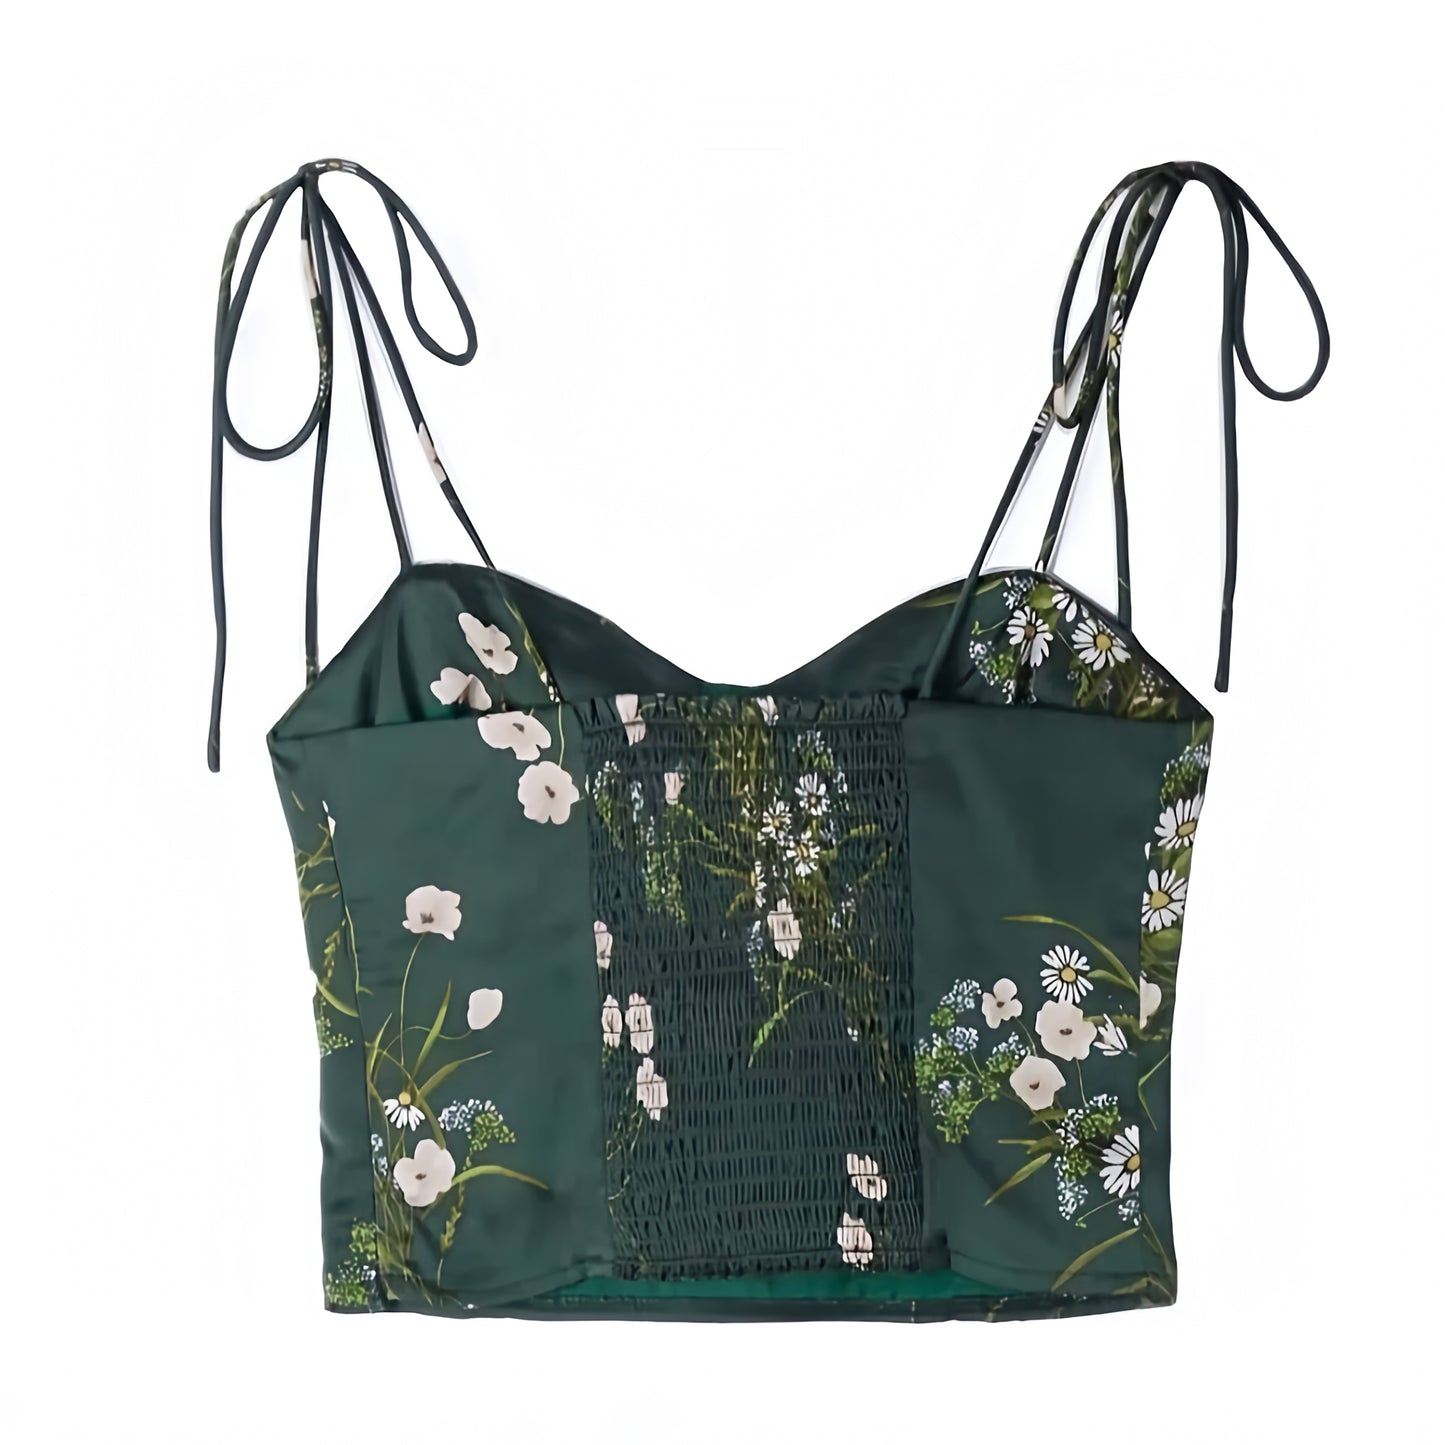 floral-print-dark-green-emerald-olive-multi-color-flower-patterned-satin-silk-slim-fit-corset-bustier-spaghetti-strap-sleeveless-backless-open-back-crop-cami-tank-top-blouse-spring-2024-summer-chic-women-ladies-elegant-casual-classy-feminine-semi-formal-preppy-style-zara-revolve-princess-polly-altard-state-edikted-urban-outfitters-brandy-melville